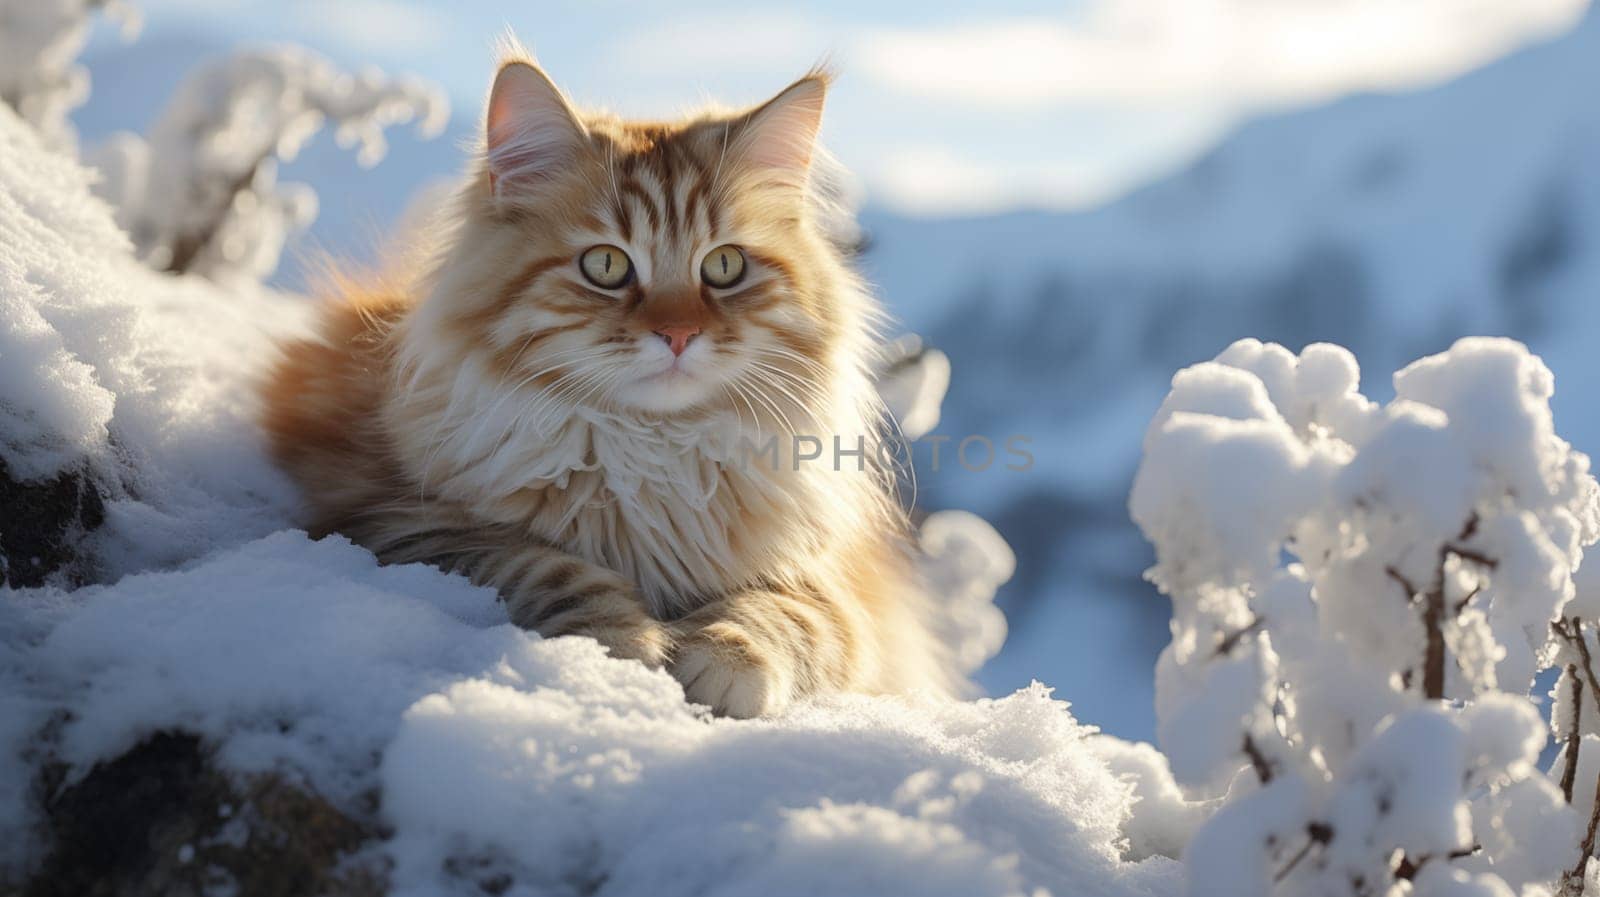 Adorable ginger fluffy cat, lie on snow, in beautiful winter landscape by Zakharova